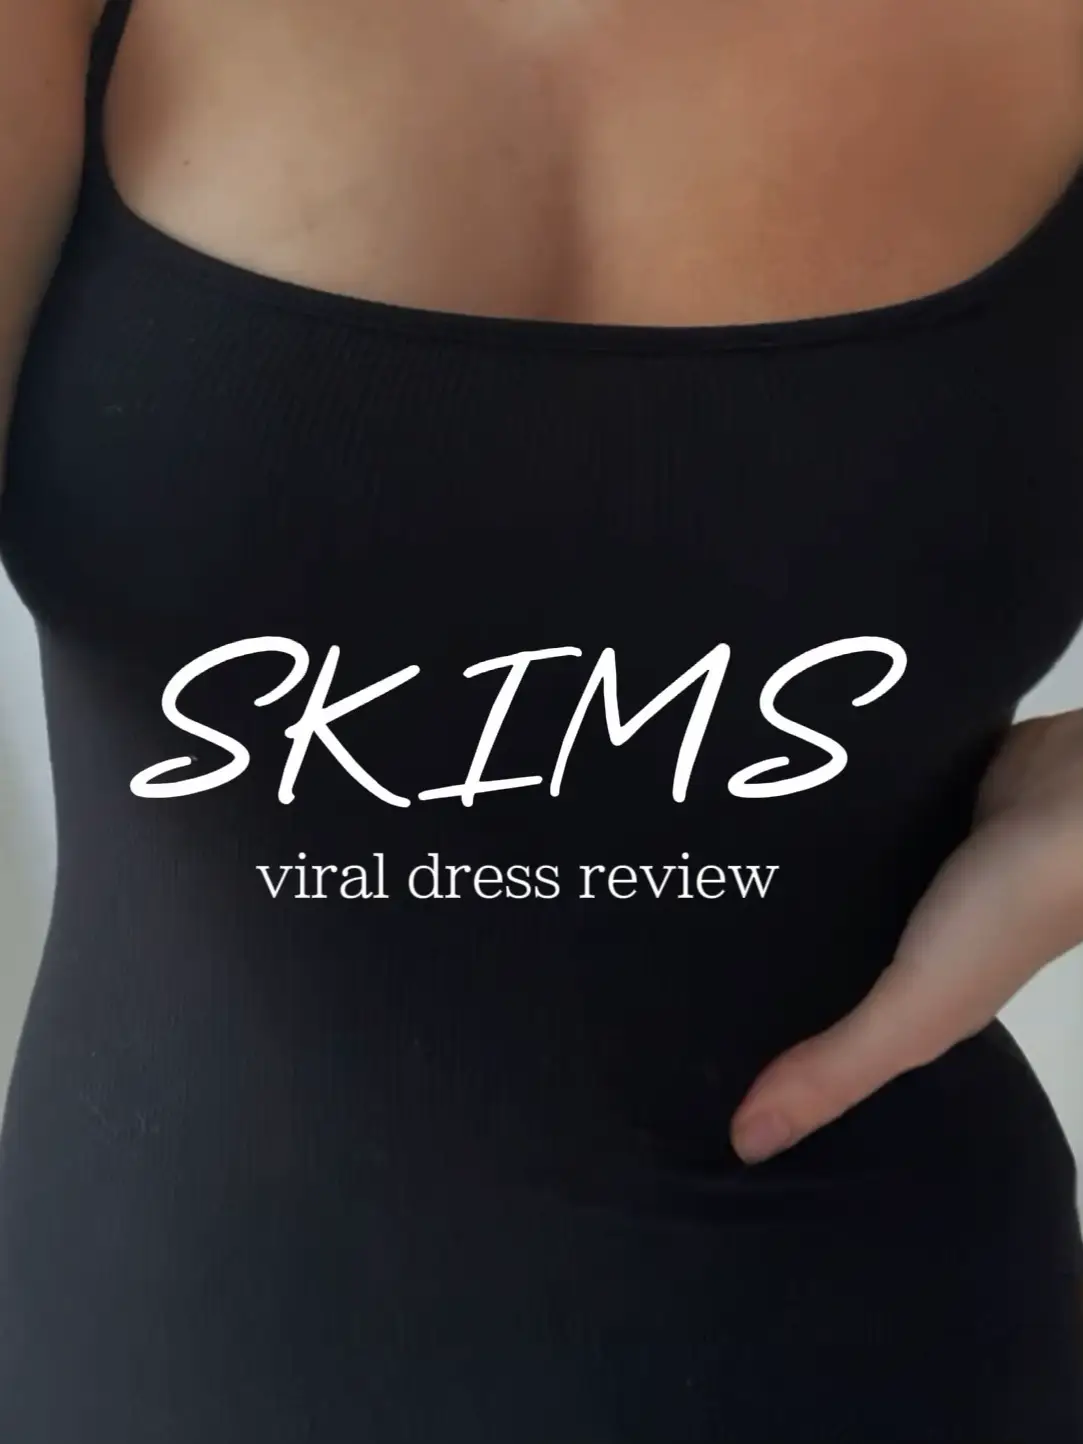 THE VIRAL SKIMS DRESS ✨, Gallery posted by katie rae